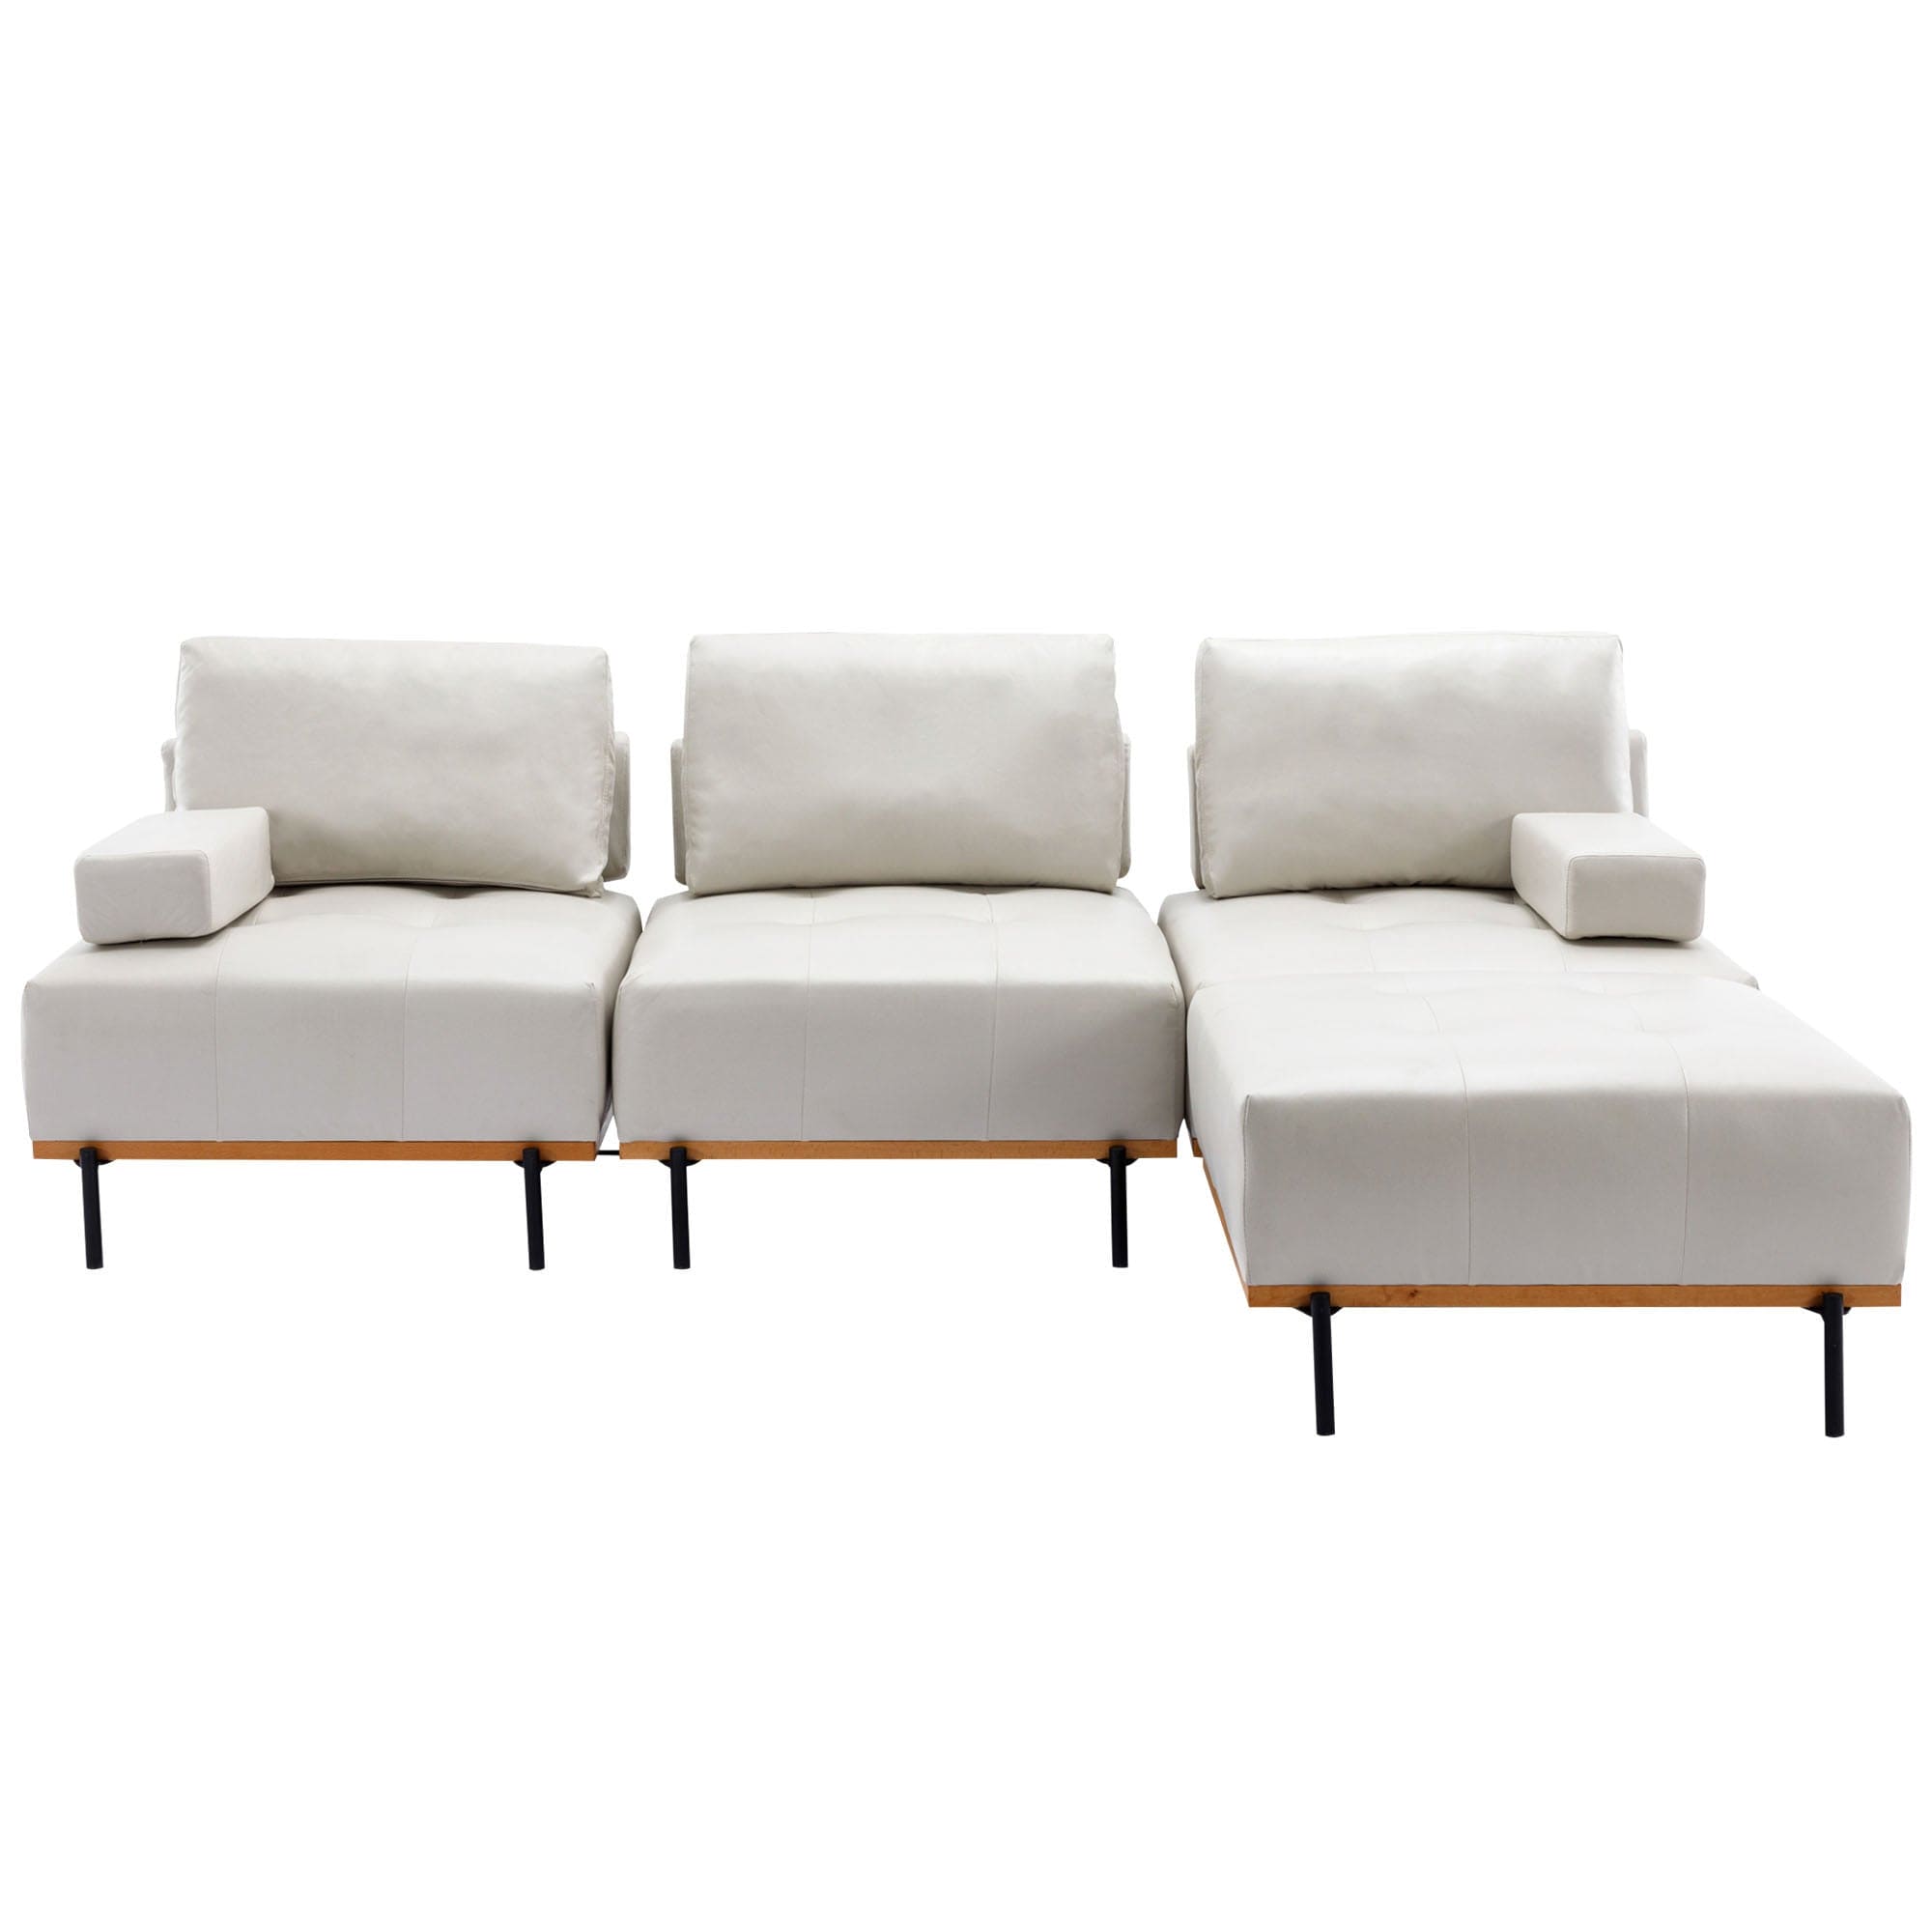 100.7'' L-Shape Sectional Sofa 3-Seater Couches with a Removable Ottoman, Comfortable Fabric for Living Room, Apartment, Beige